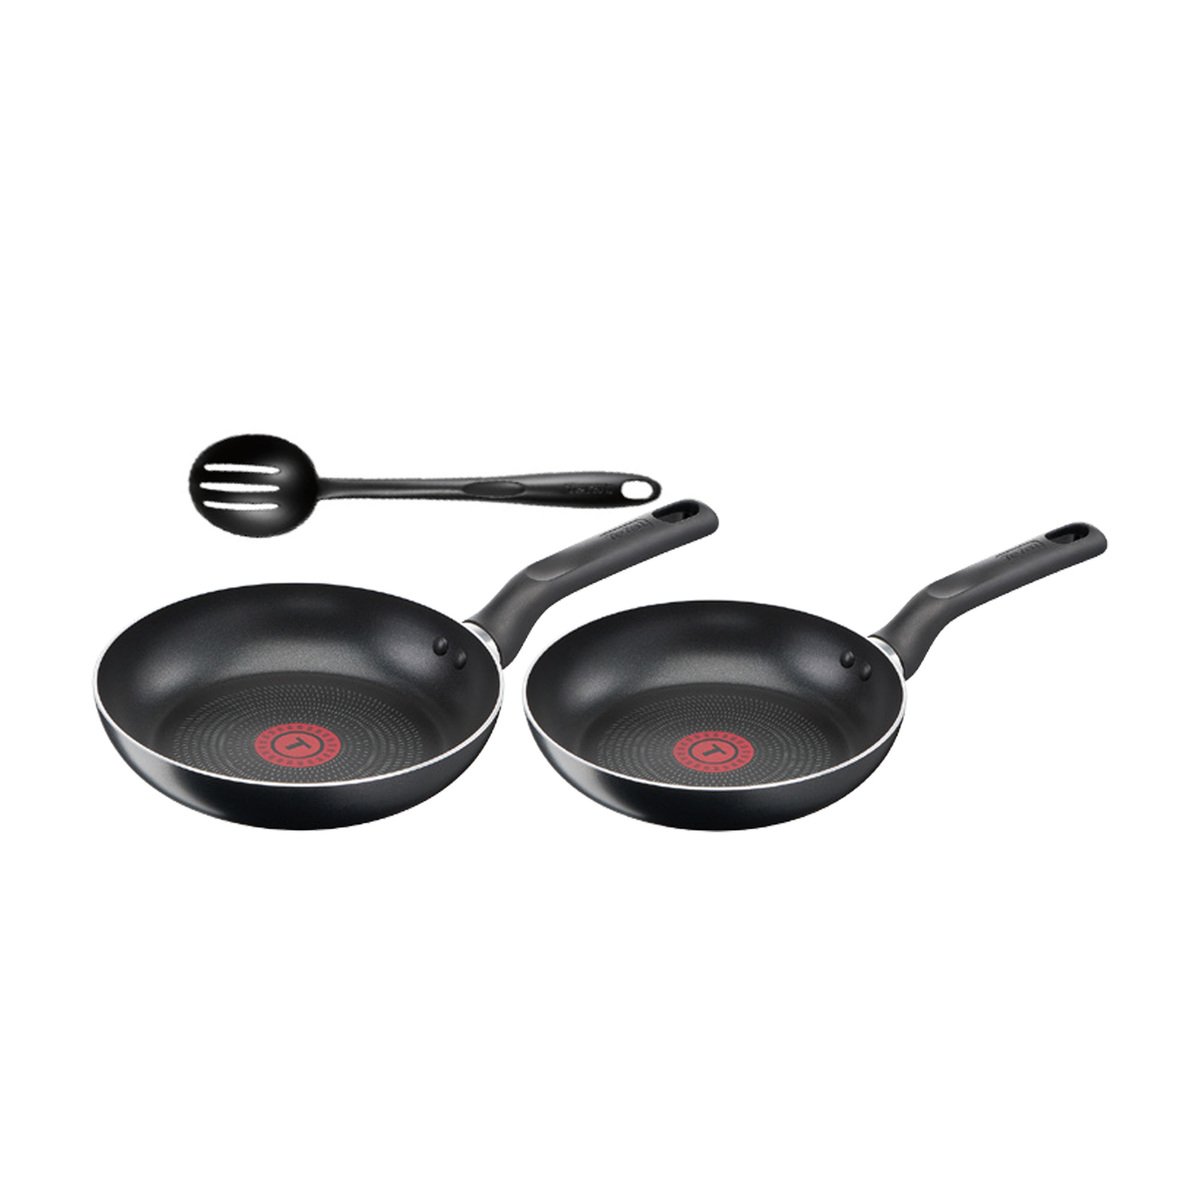 Tefal Super Cook Fry Pan with Spoon, 28 + 24 cm